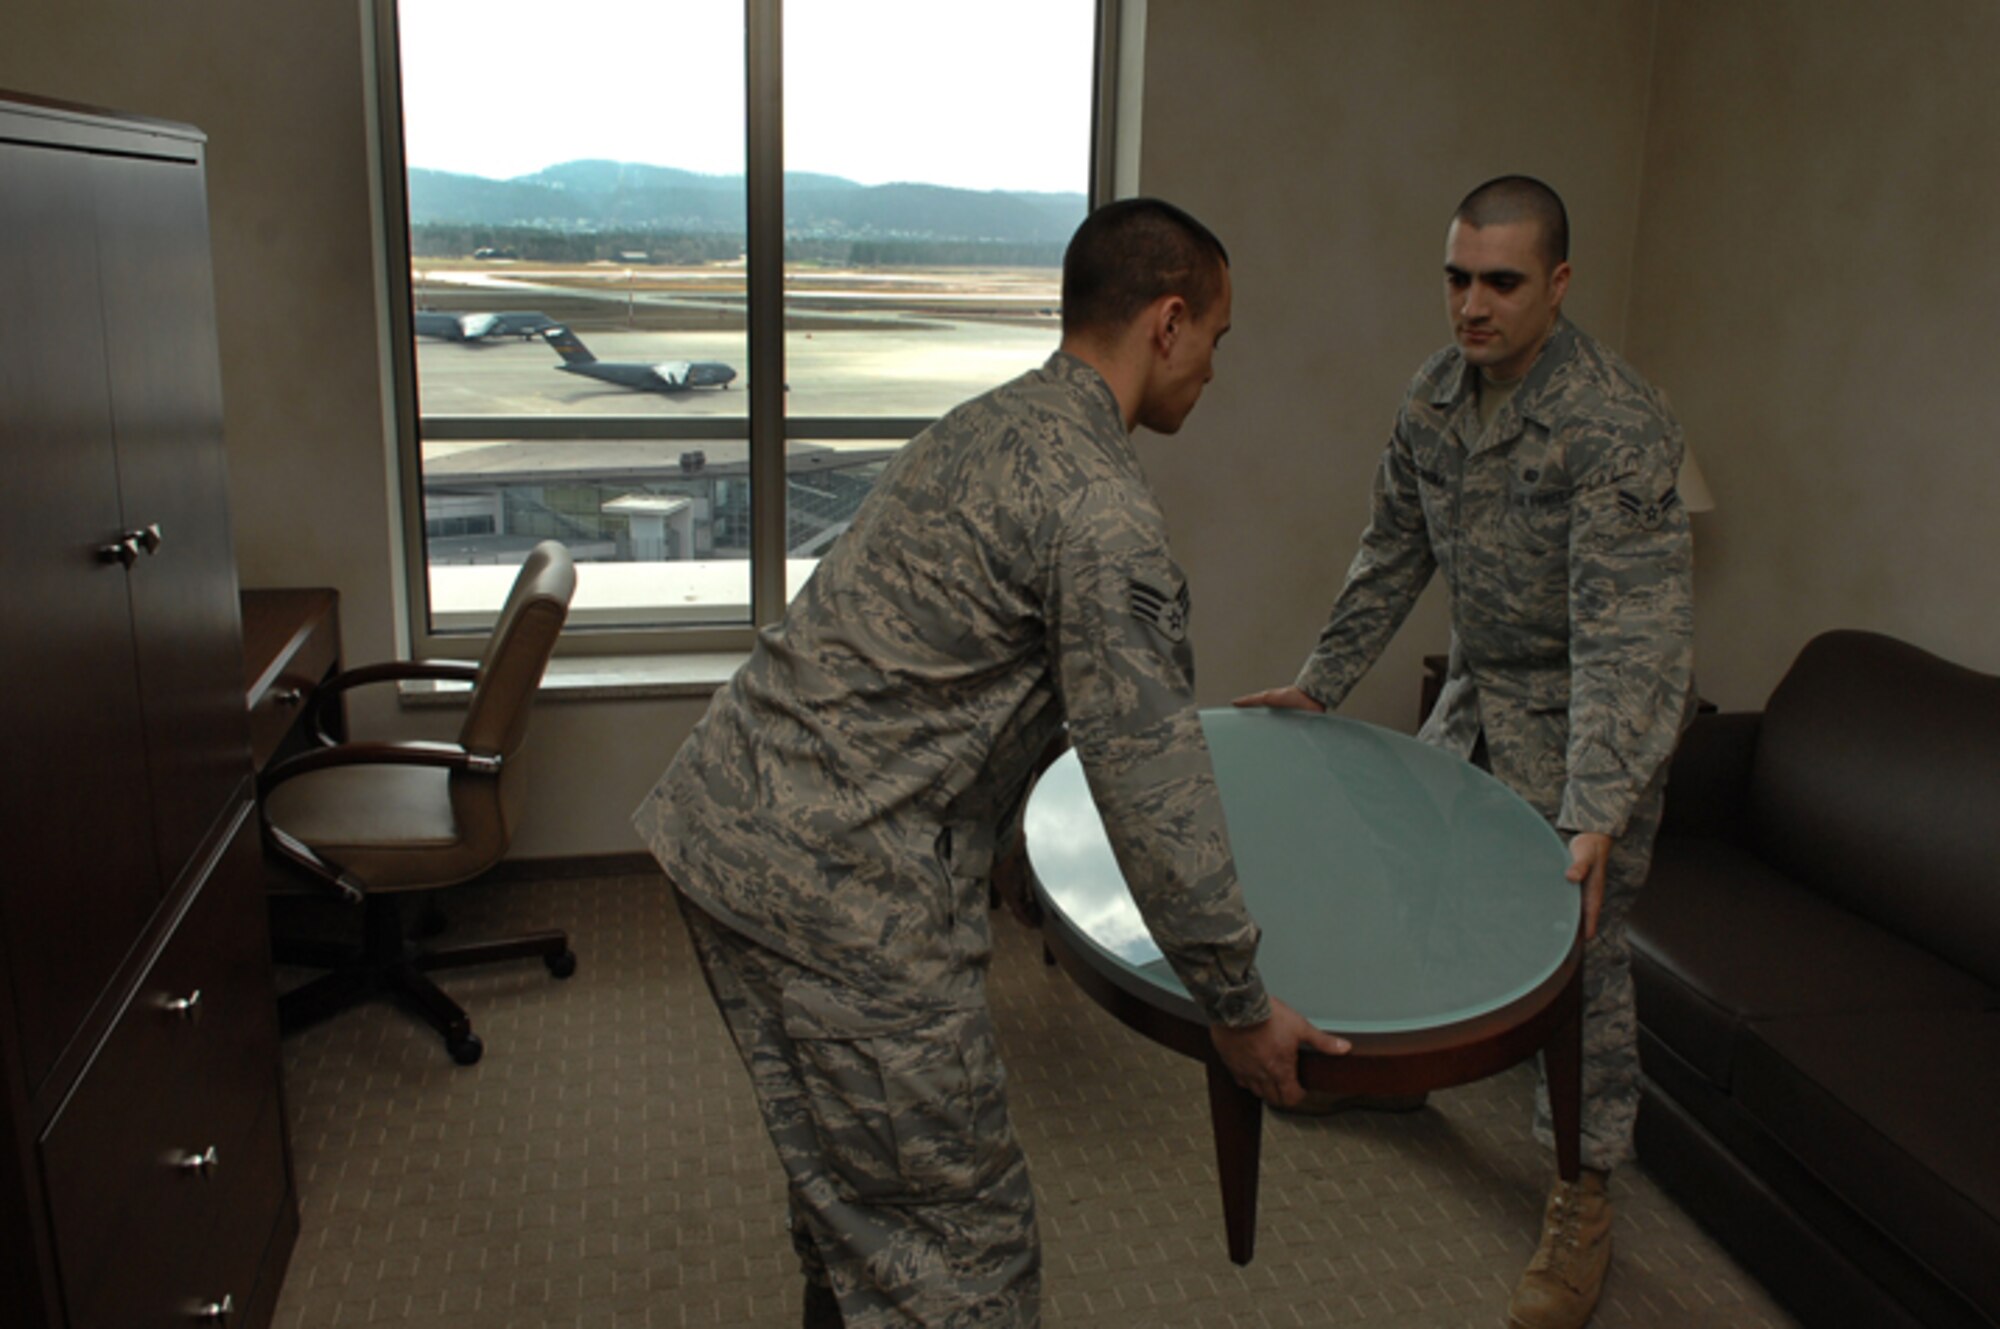 Senior Airman Christopher Gonzalez and Airman 1st Class Cory Prochaska, both from the 435th Services Squadron, deliver furniture to the new visitor quarters at the Kaiserslautern Military Community Center on Ramstein Air Base. The eight-story, 350-room visiting quarters facility will be one of the first areas to open as part of a $170 million project that will offer approximately 844,000 square feet of lodging, shopping and entertainment under one roof. (U.S. Air Force photo by Airman 1st Class Tony Ritter)
